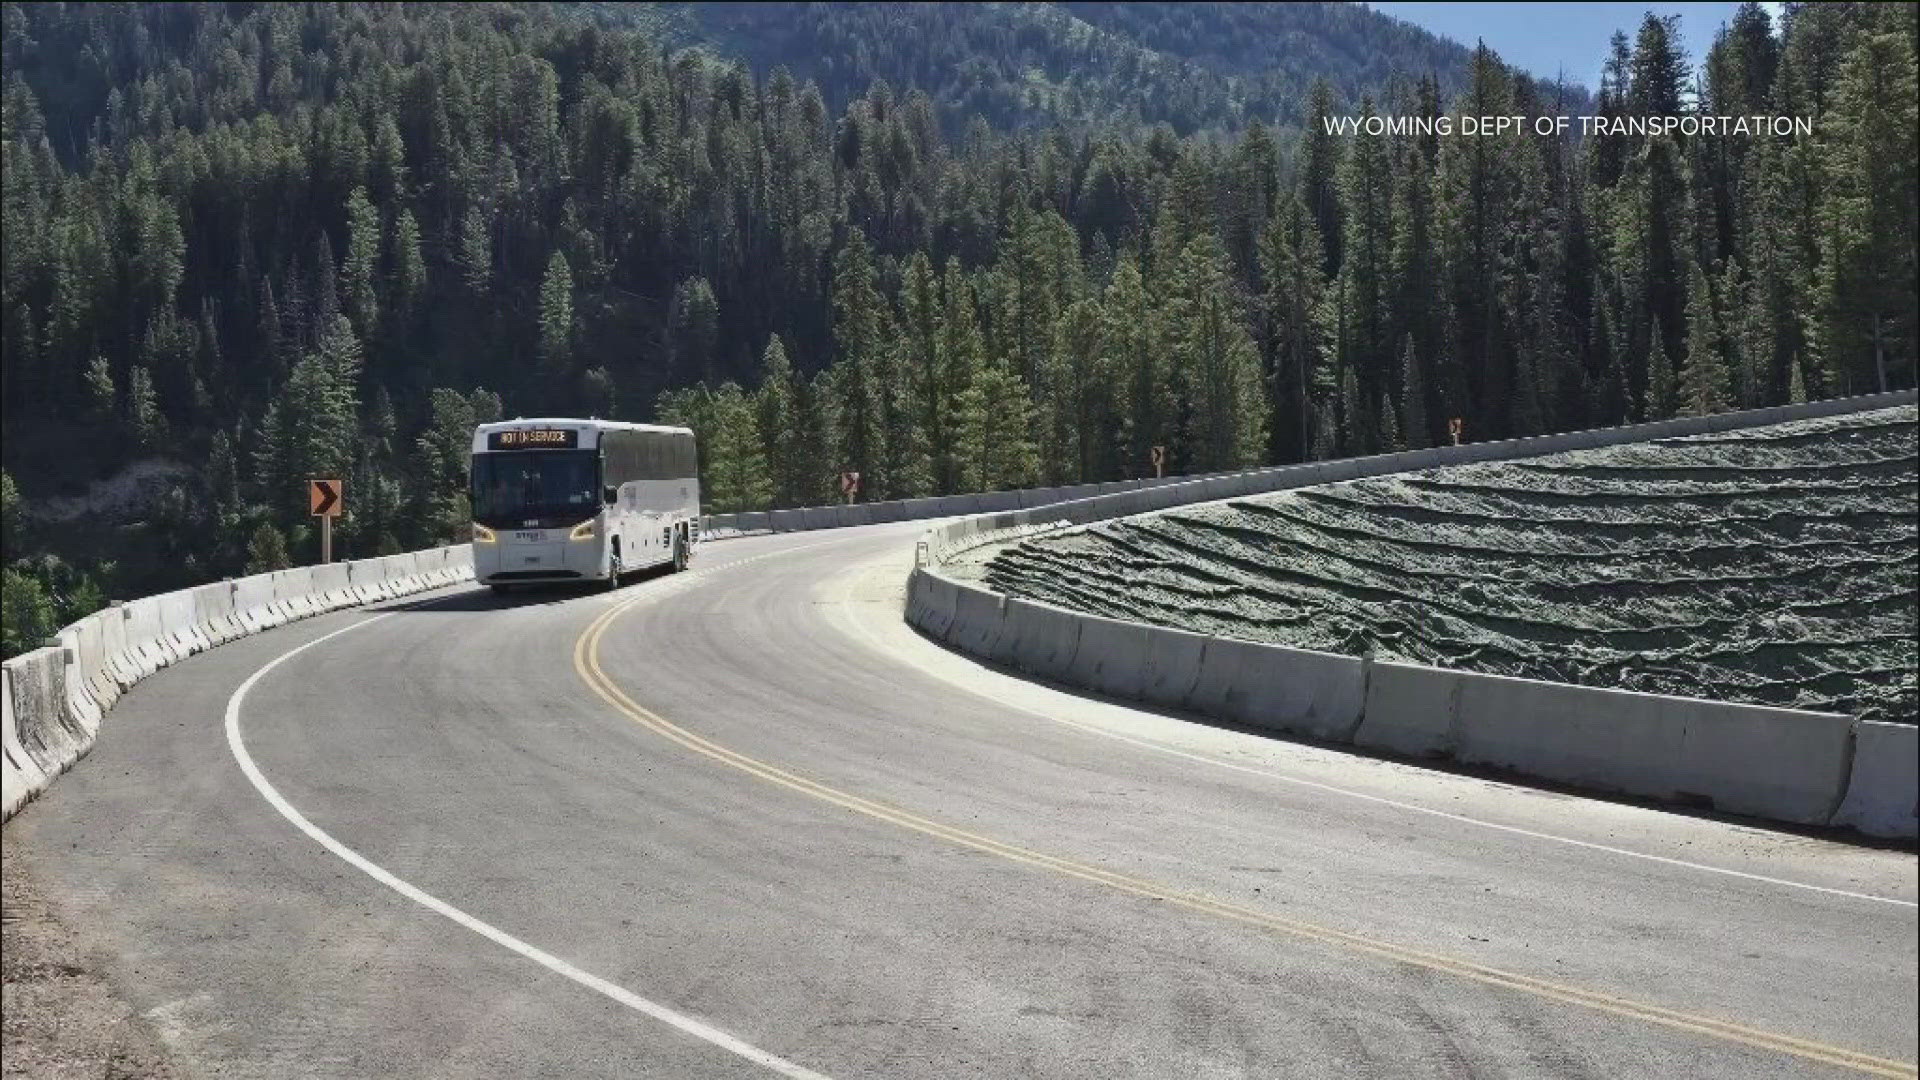 The pass opened on June 28.